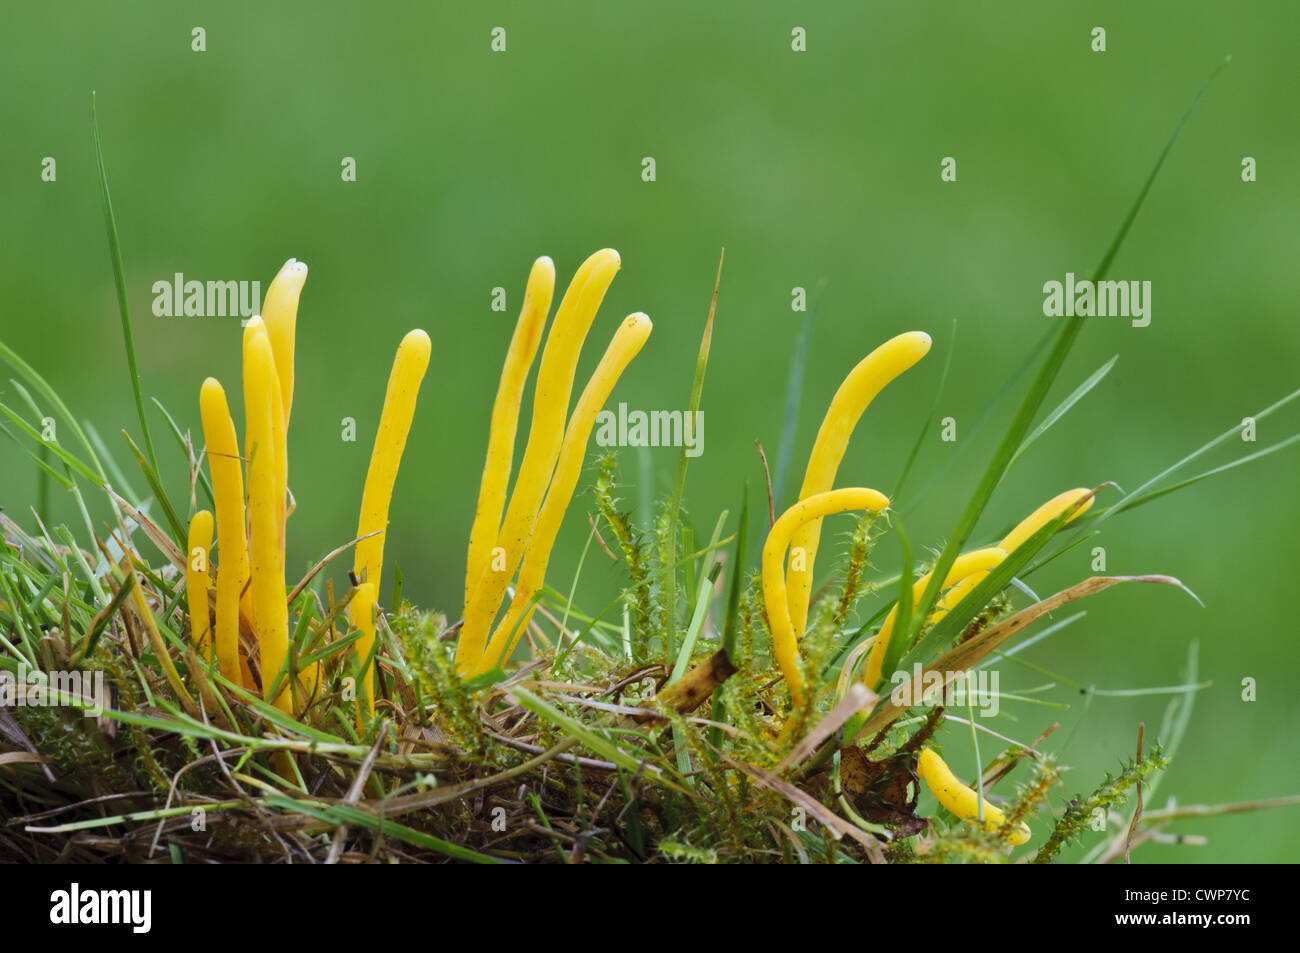 Golden Spindles (Clavulinopsis fusiformis) fruiting bodies, growing amongst grass, Clumber Park, Nottinghamshire, England, Stock Photo